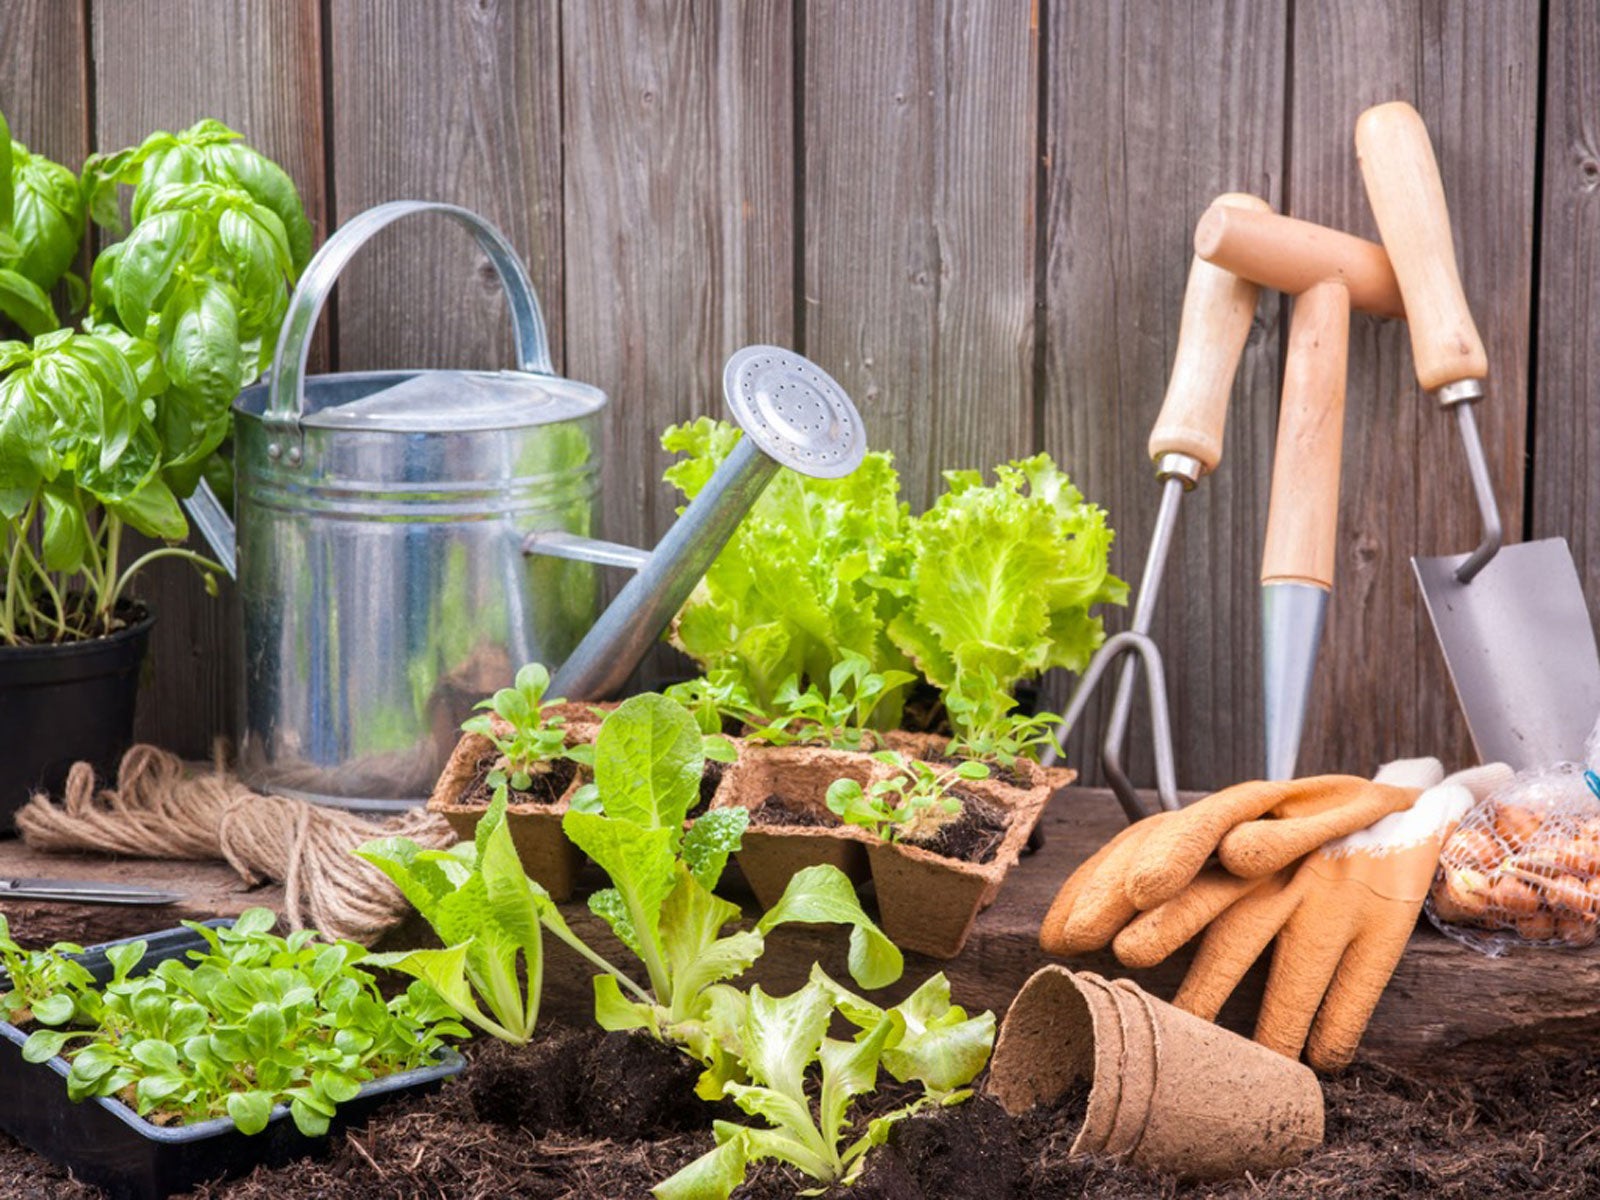  Gardening  For Beginners Starting A Garden  At Home  The 